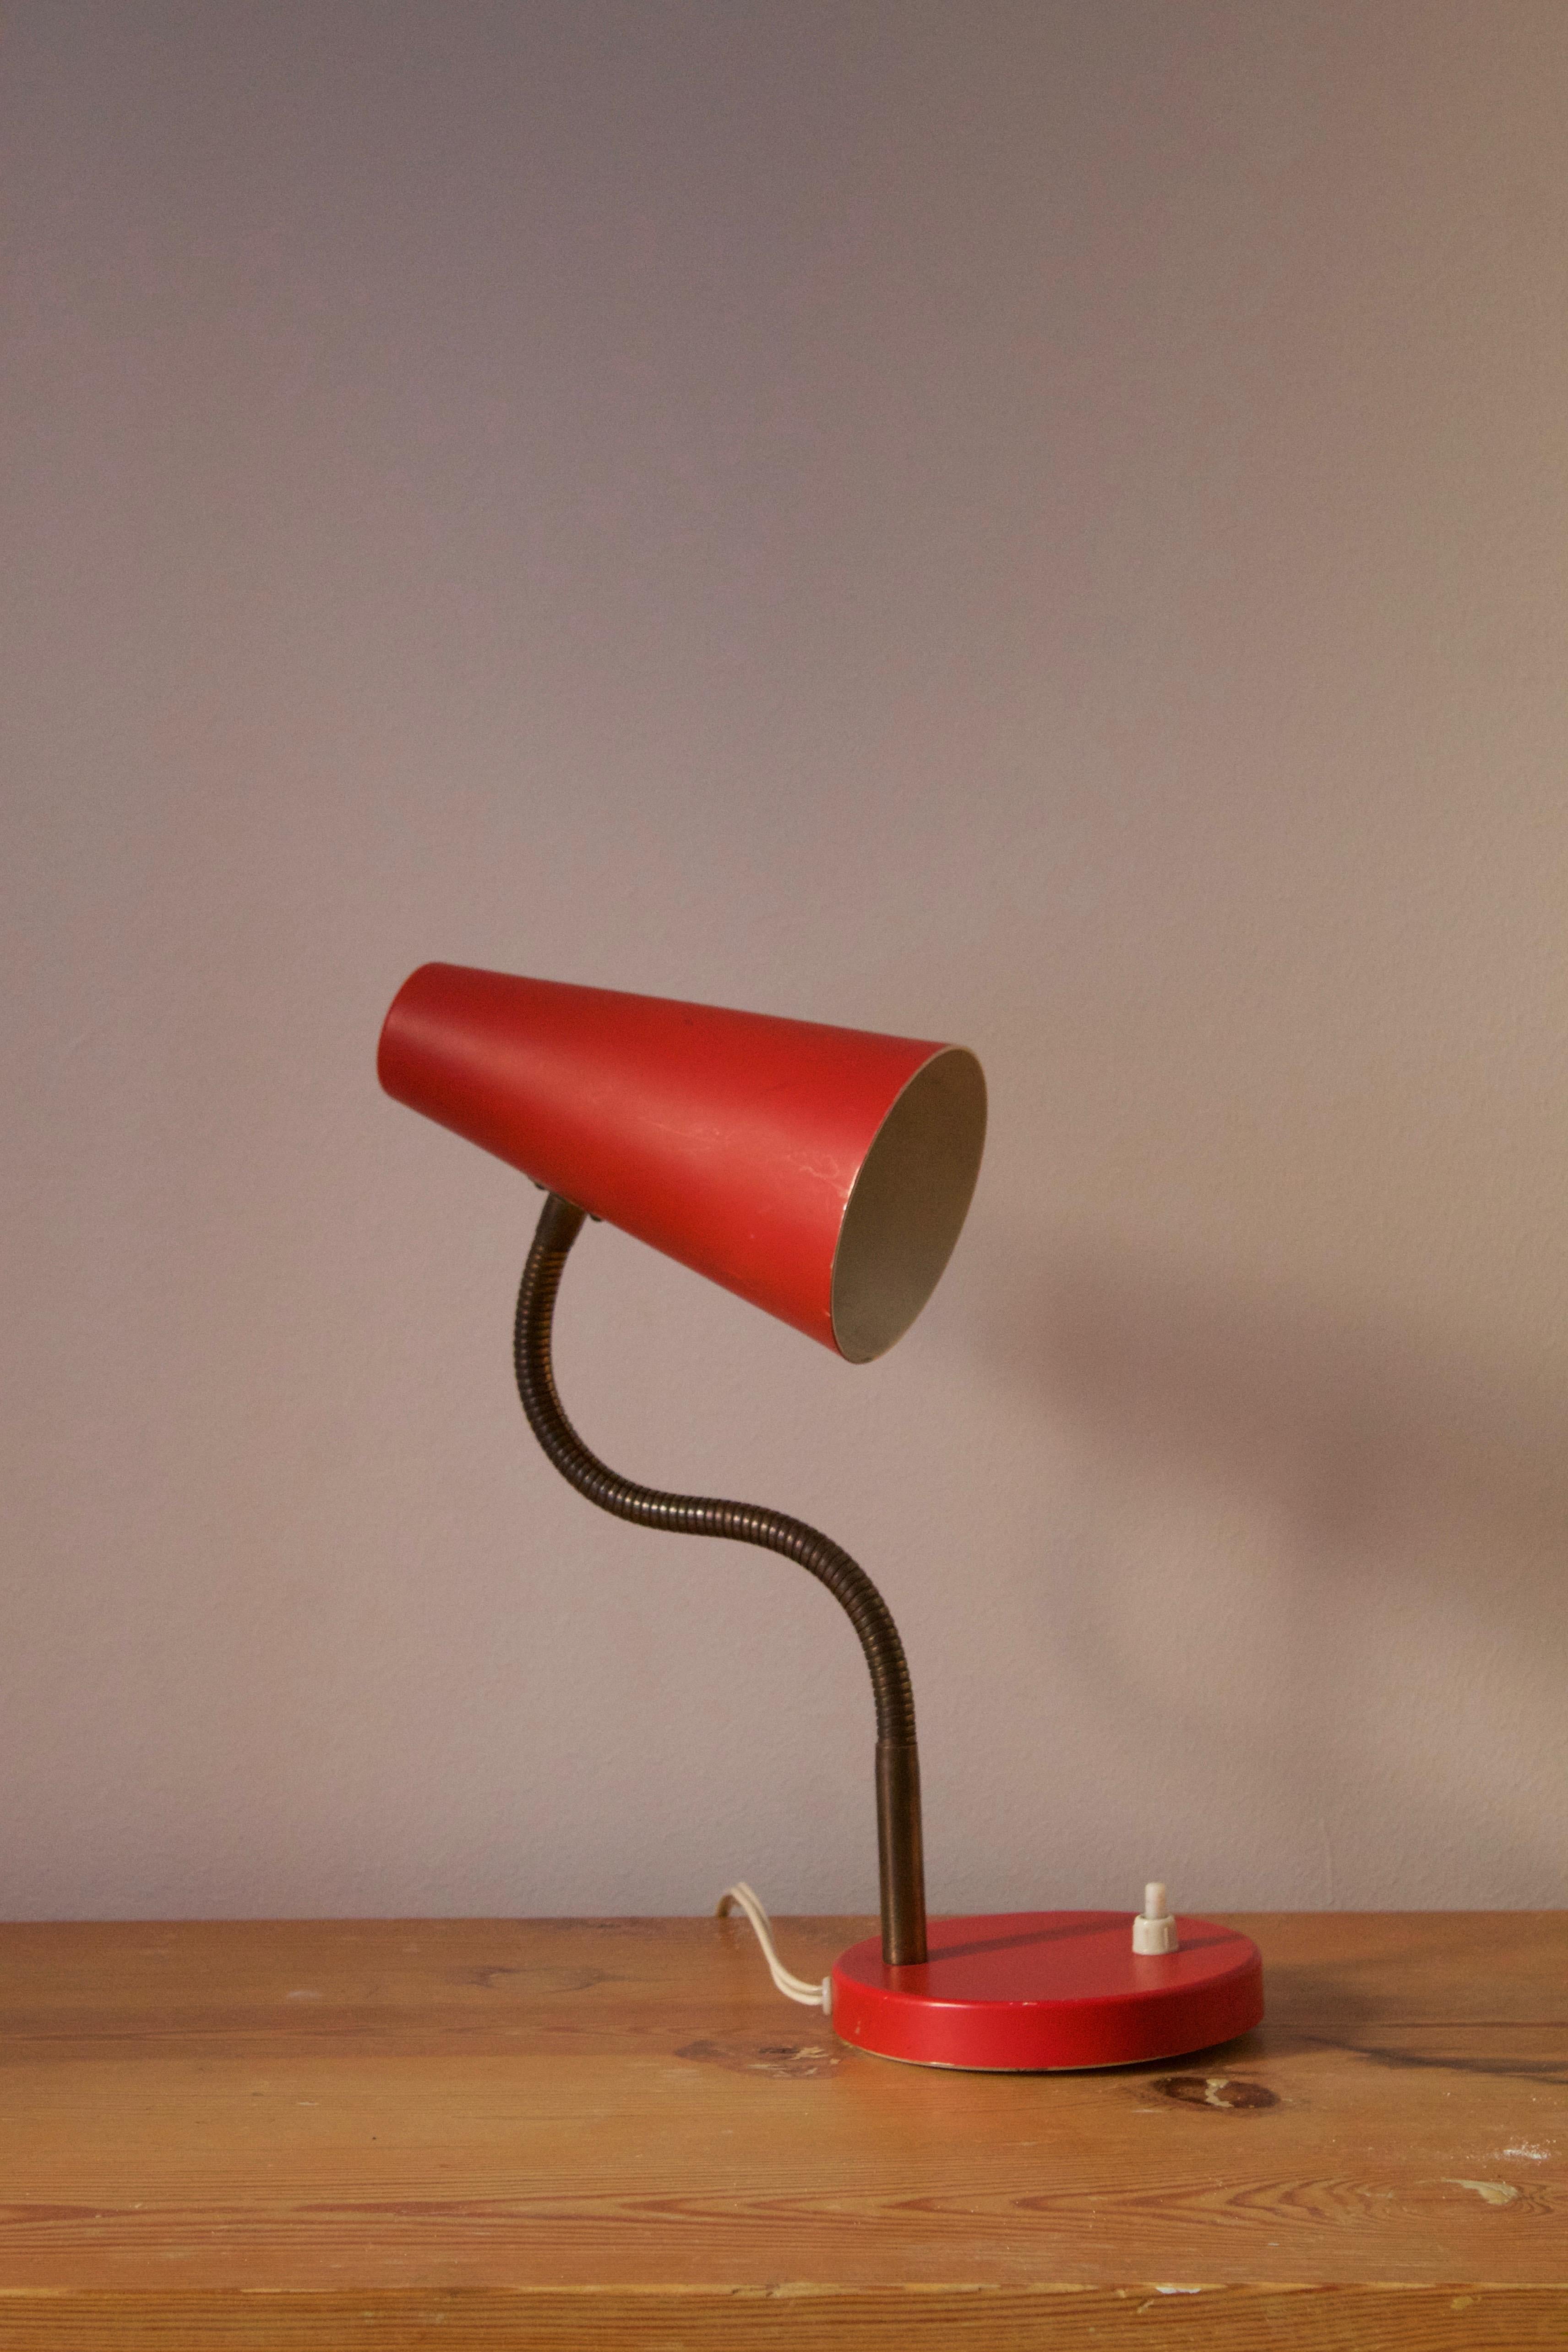 A table lamp / desk light, design is attributed to Svend Aage Holm Sørensen, Denmark, 1950s. Adjustable screen, original red lacquer. 

Other designers of the period include Paavo Tynell, Serge Mouille, Josef Frank, Angelo Lelii, and Lisa